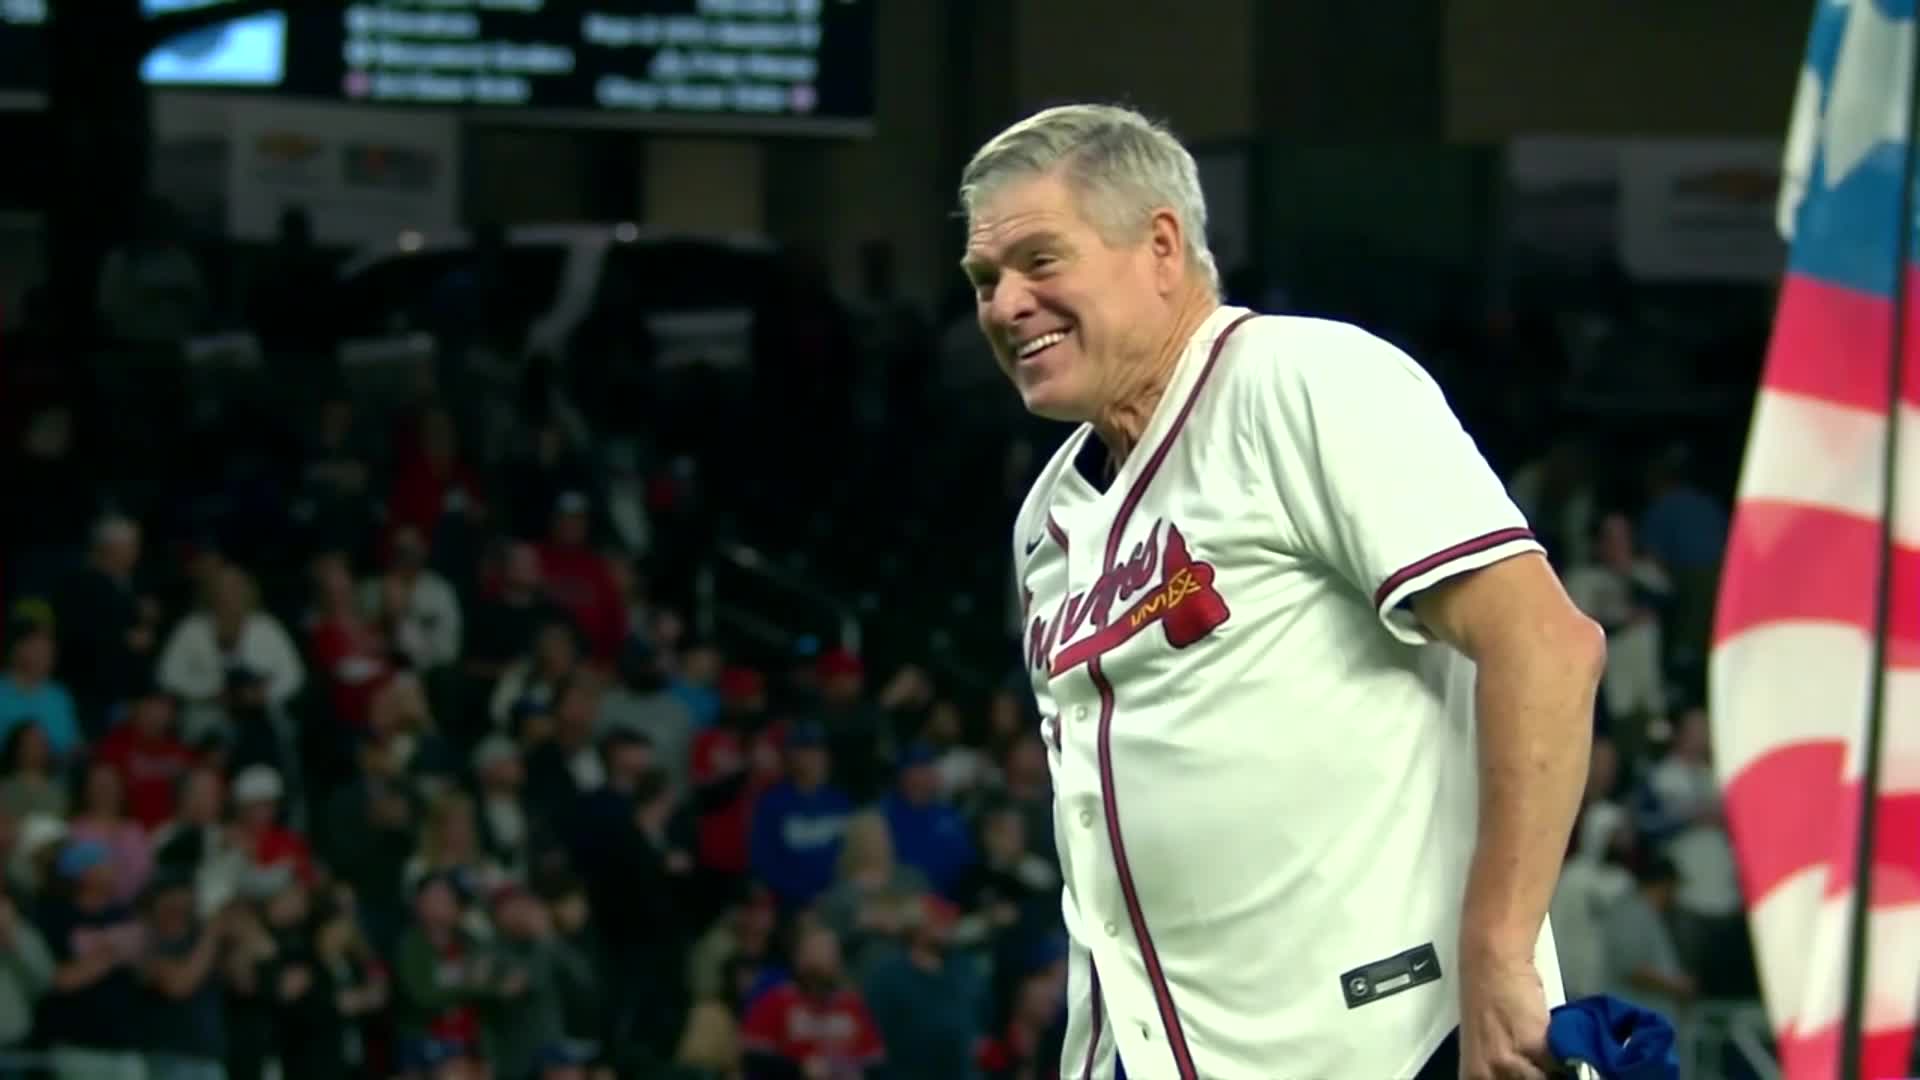 Dale Murphy throws the first pitch for Game 2 of the NLCS. : r